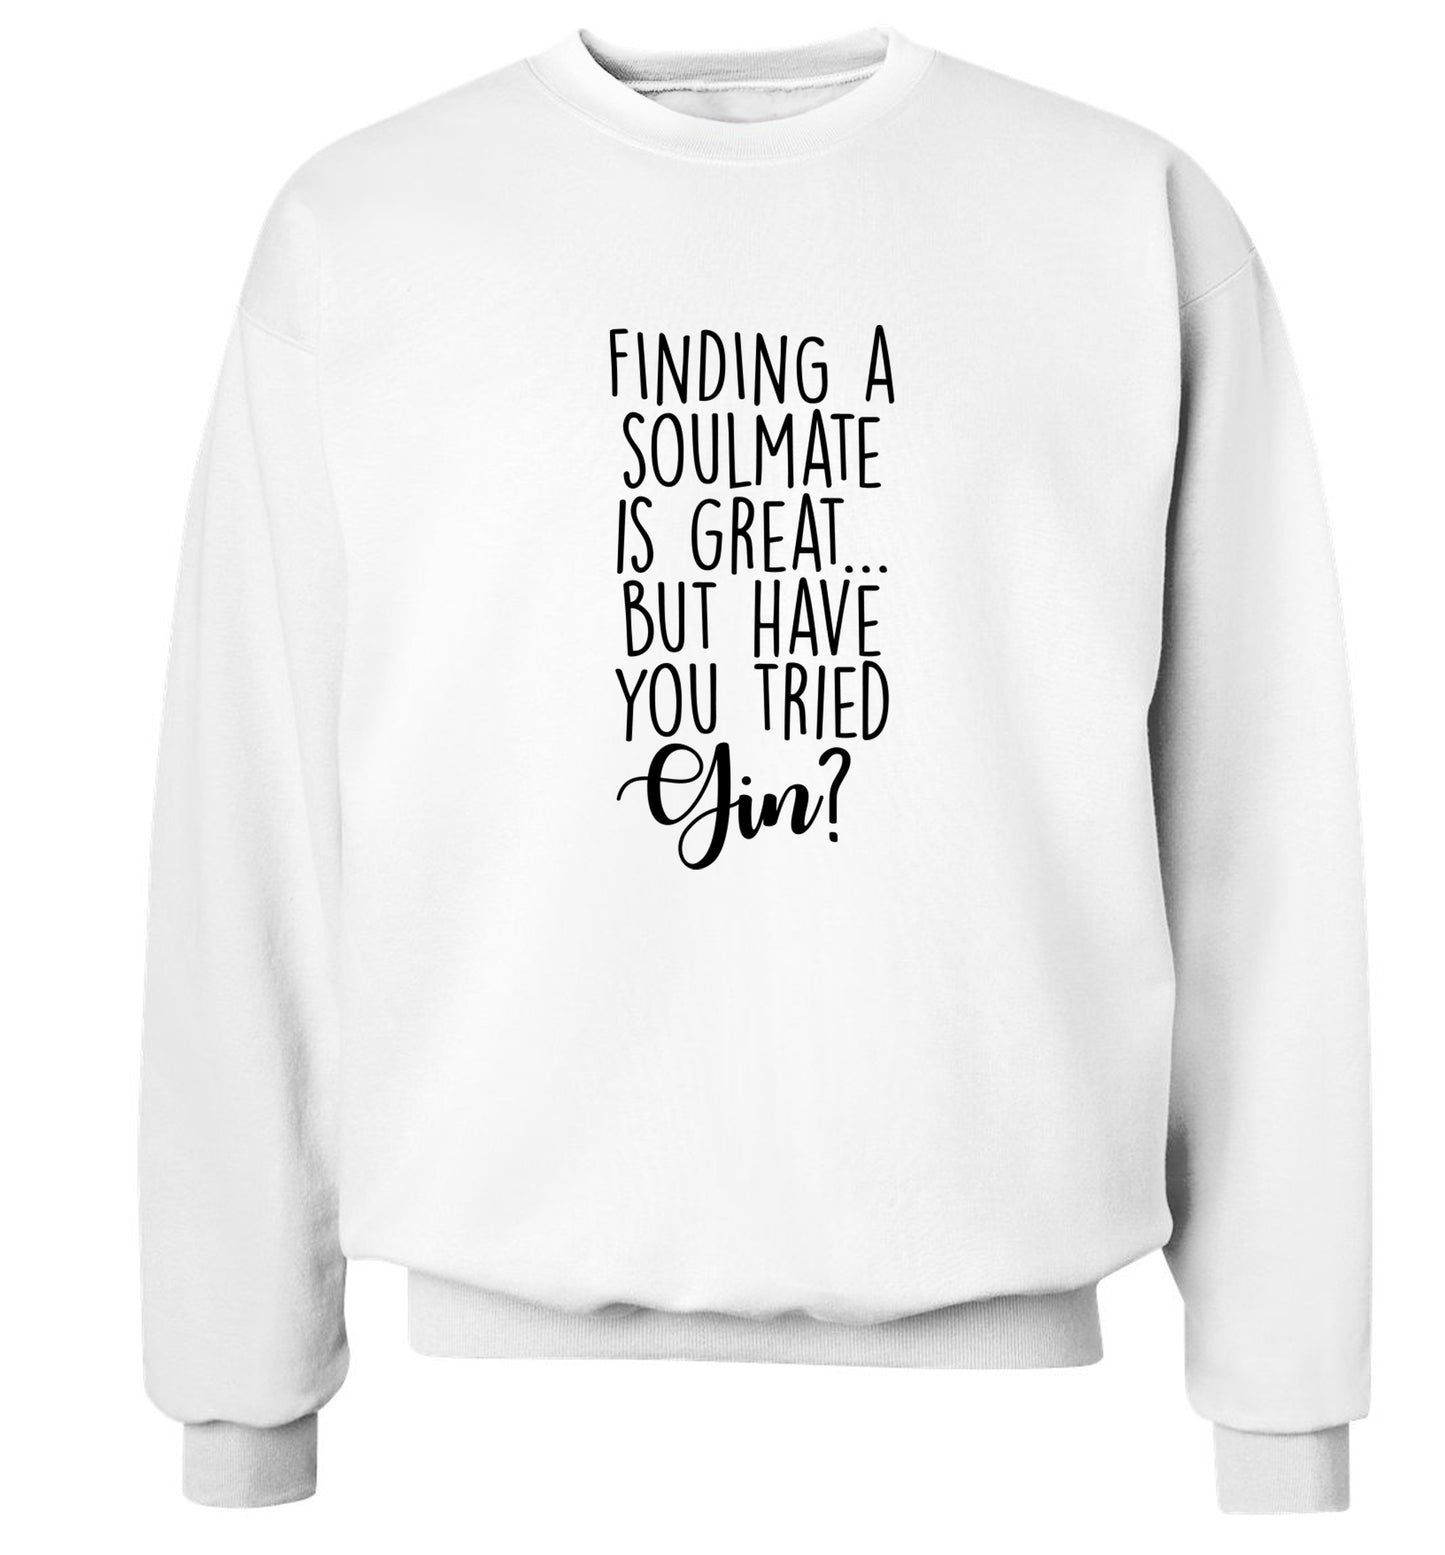 Finding a soulmate is great but have you tried gin? Adult's unisex white Sweater 2XL